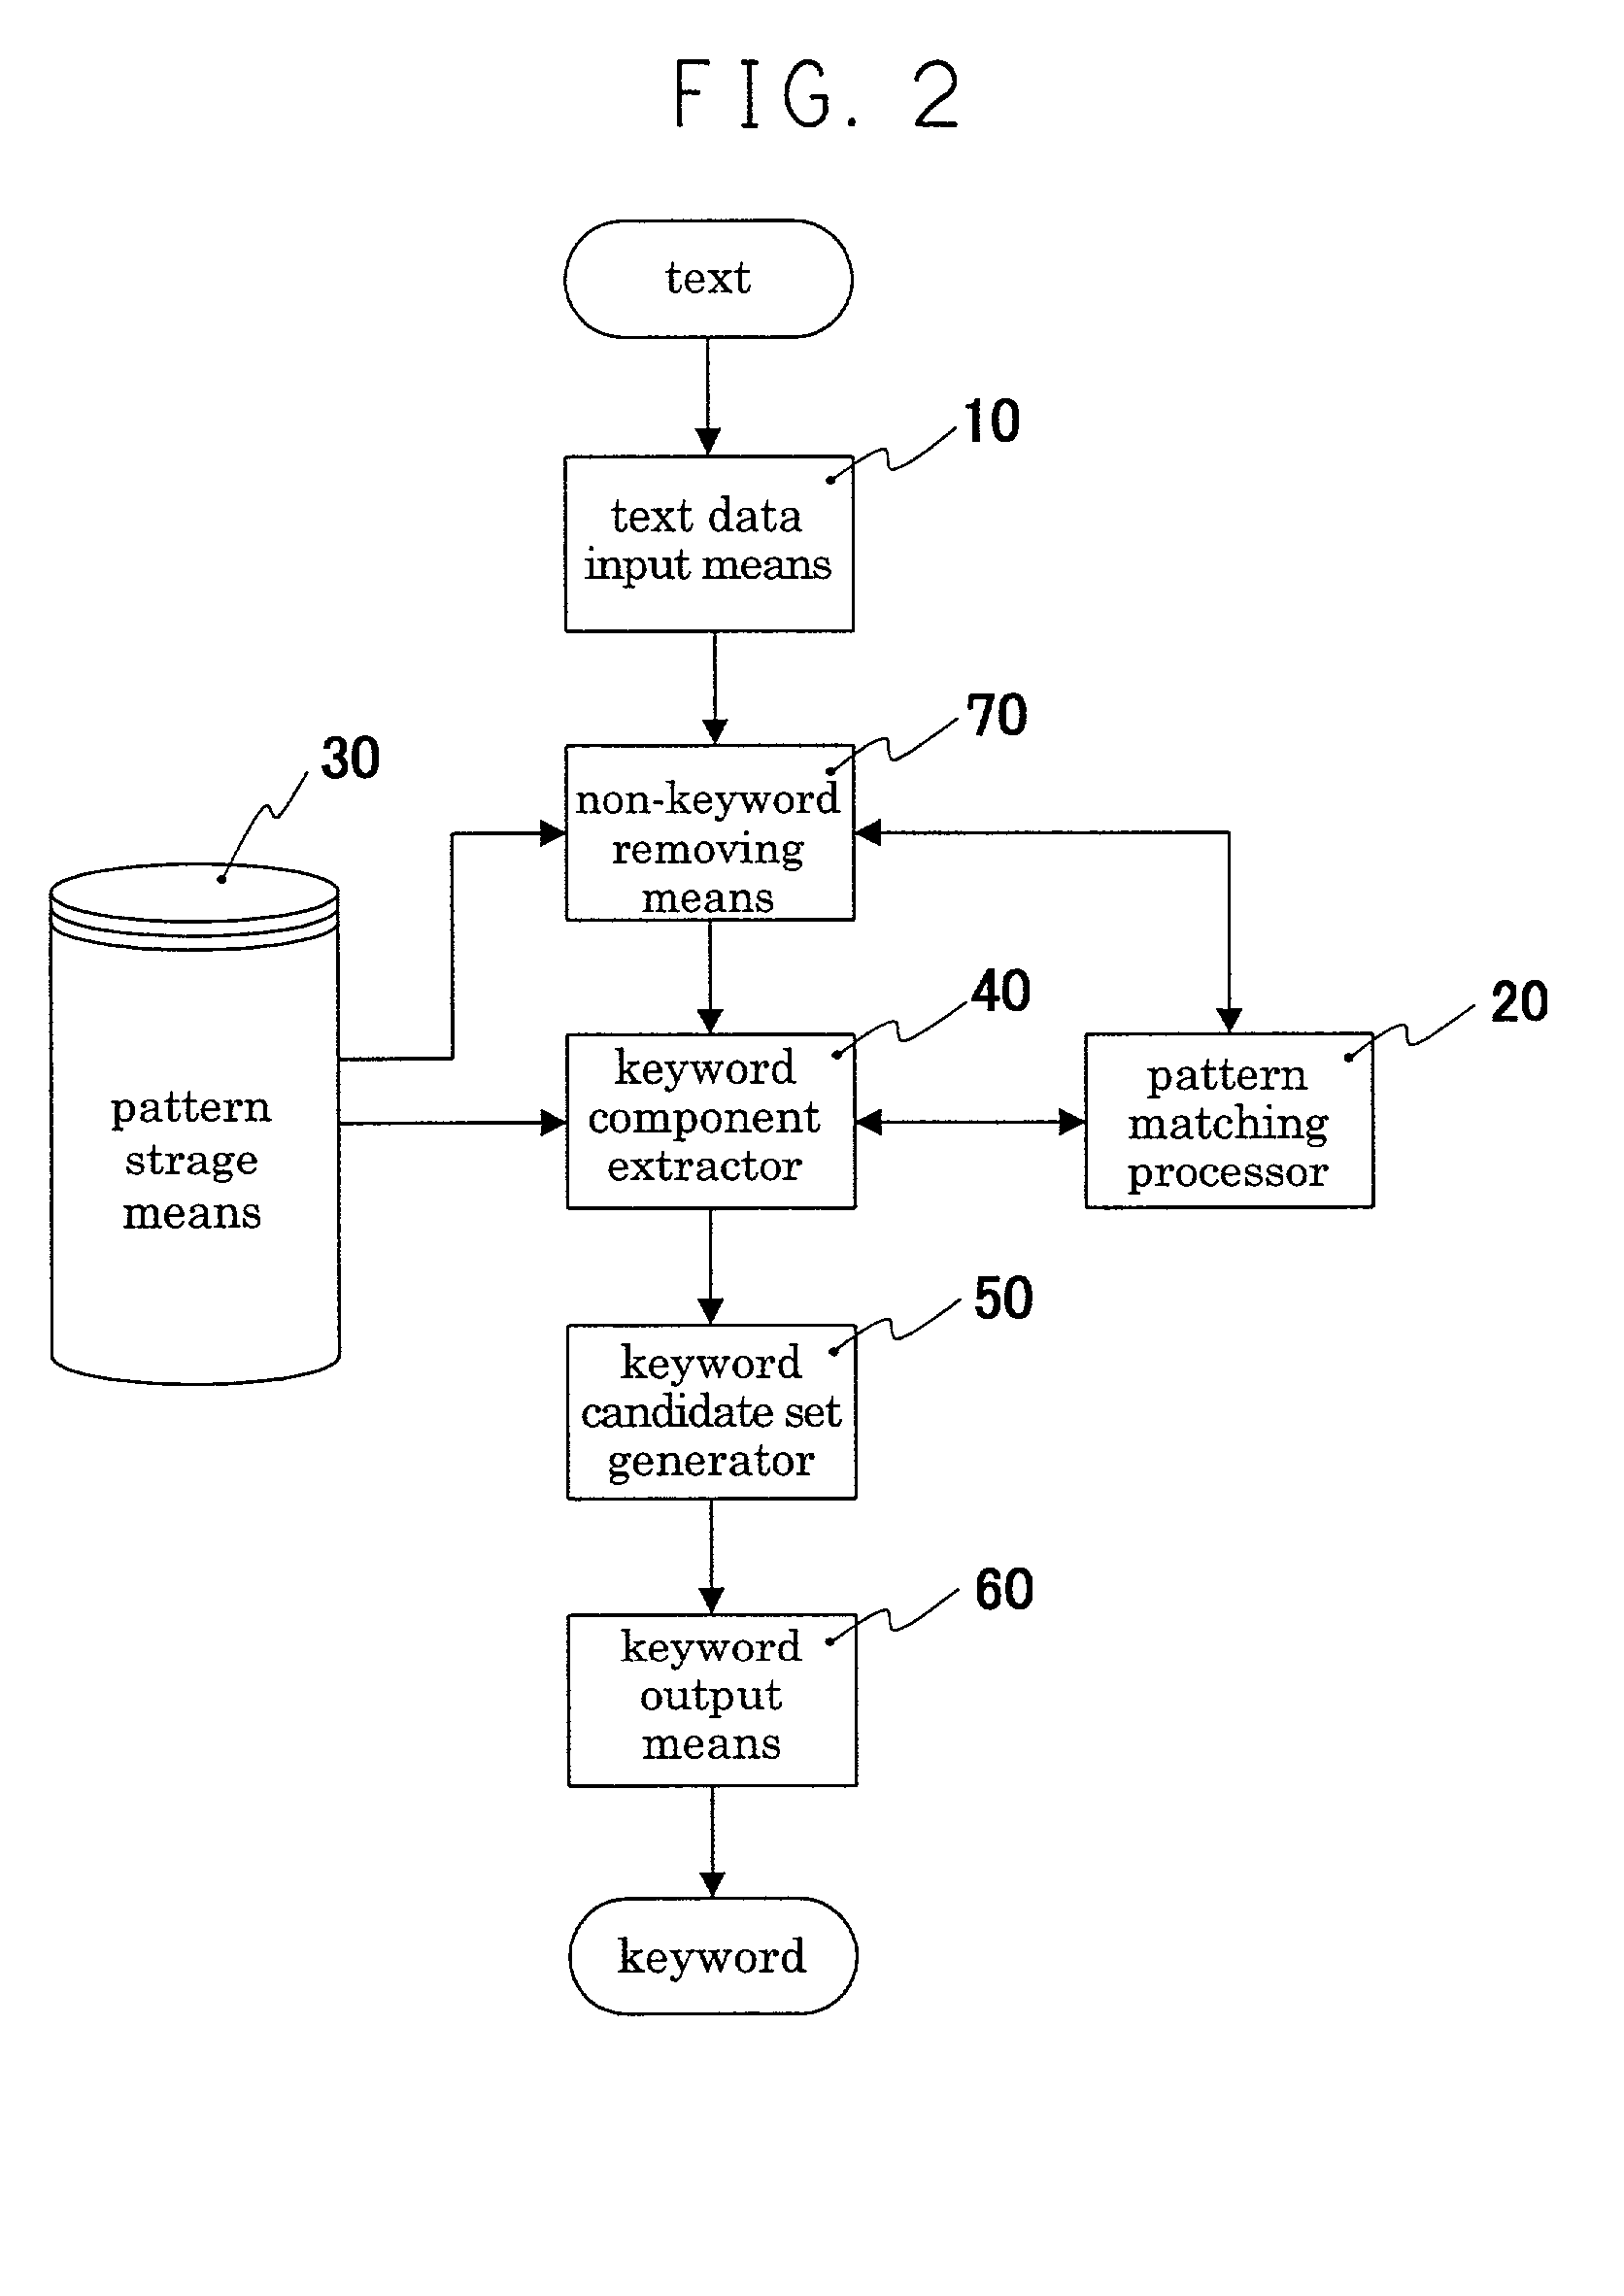 Keyword extracting device